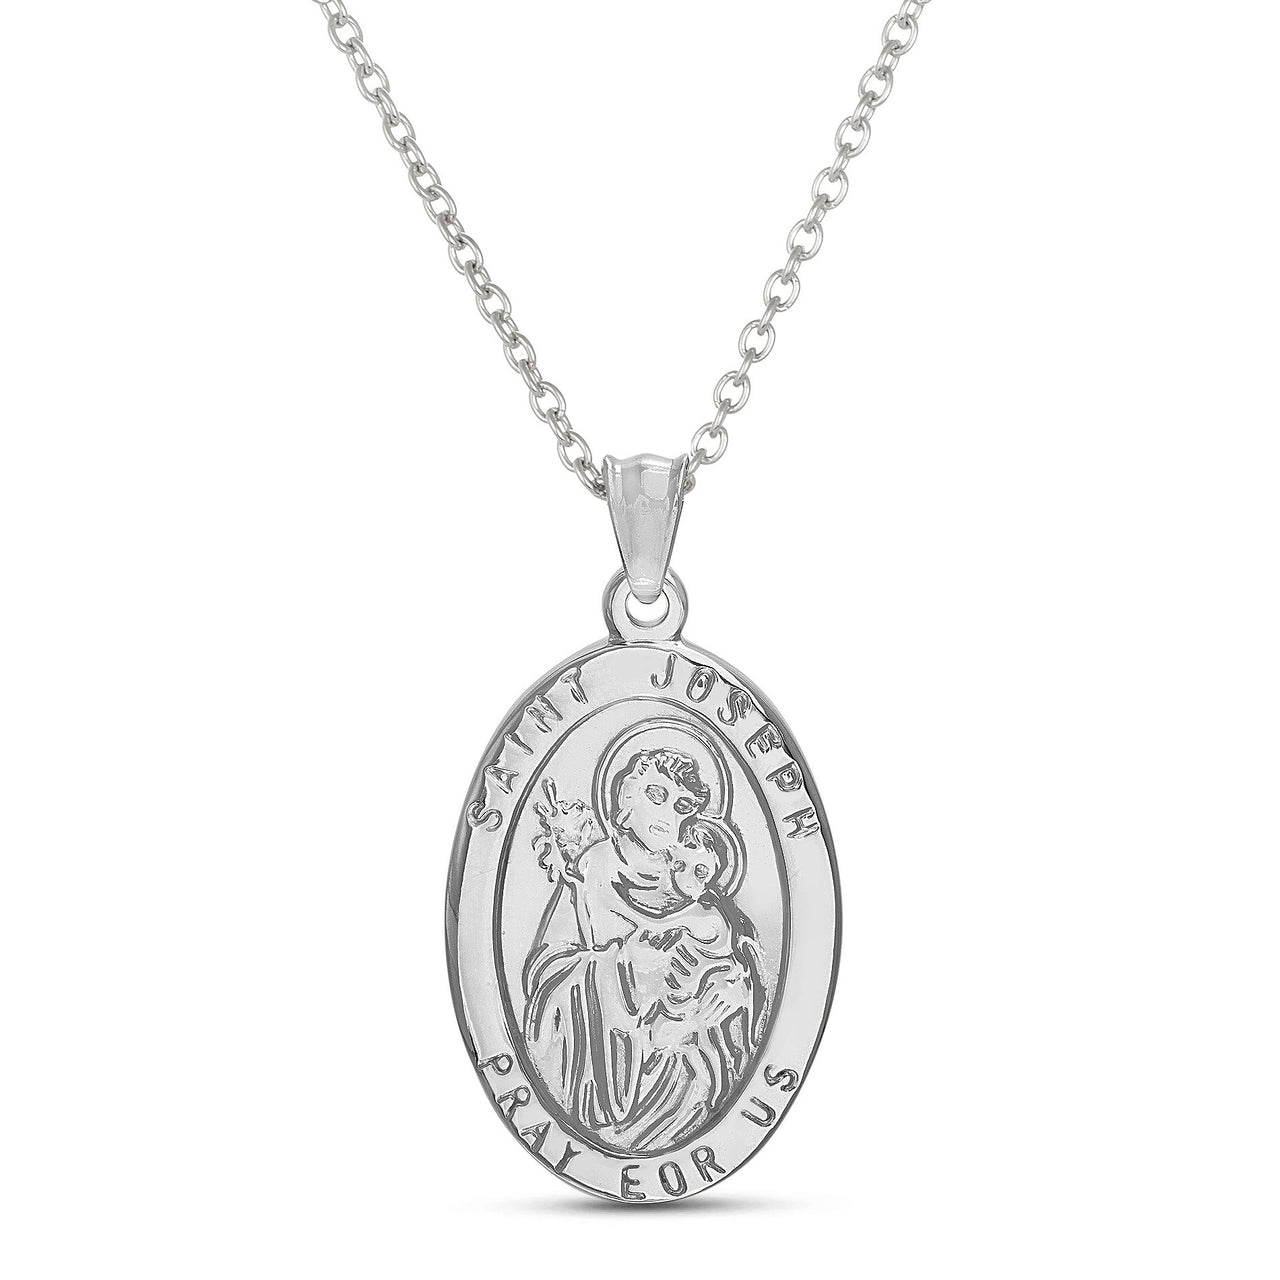 My Bible Stainless Steel Religious Medal St Joseph Pendant Necklace